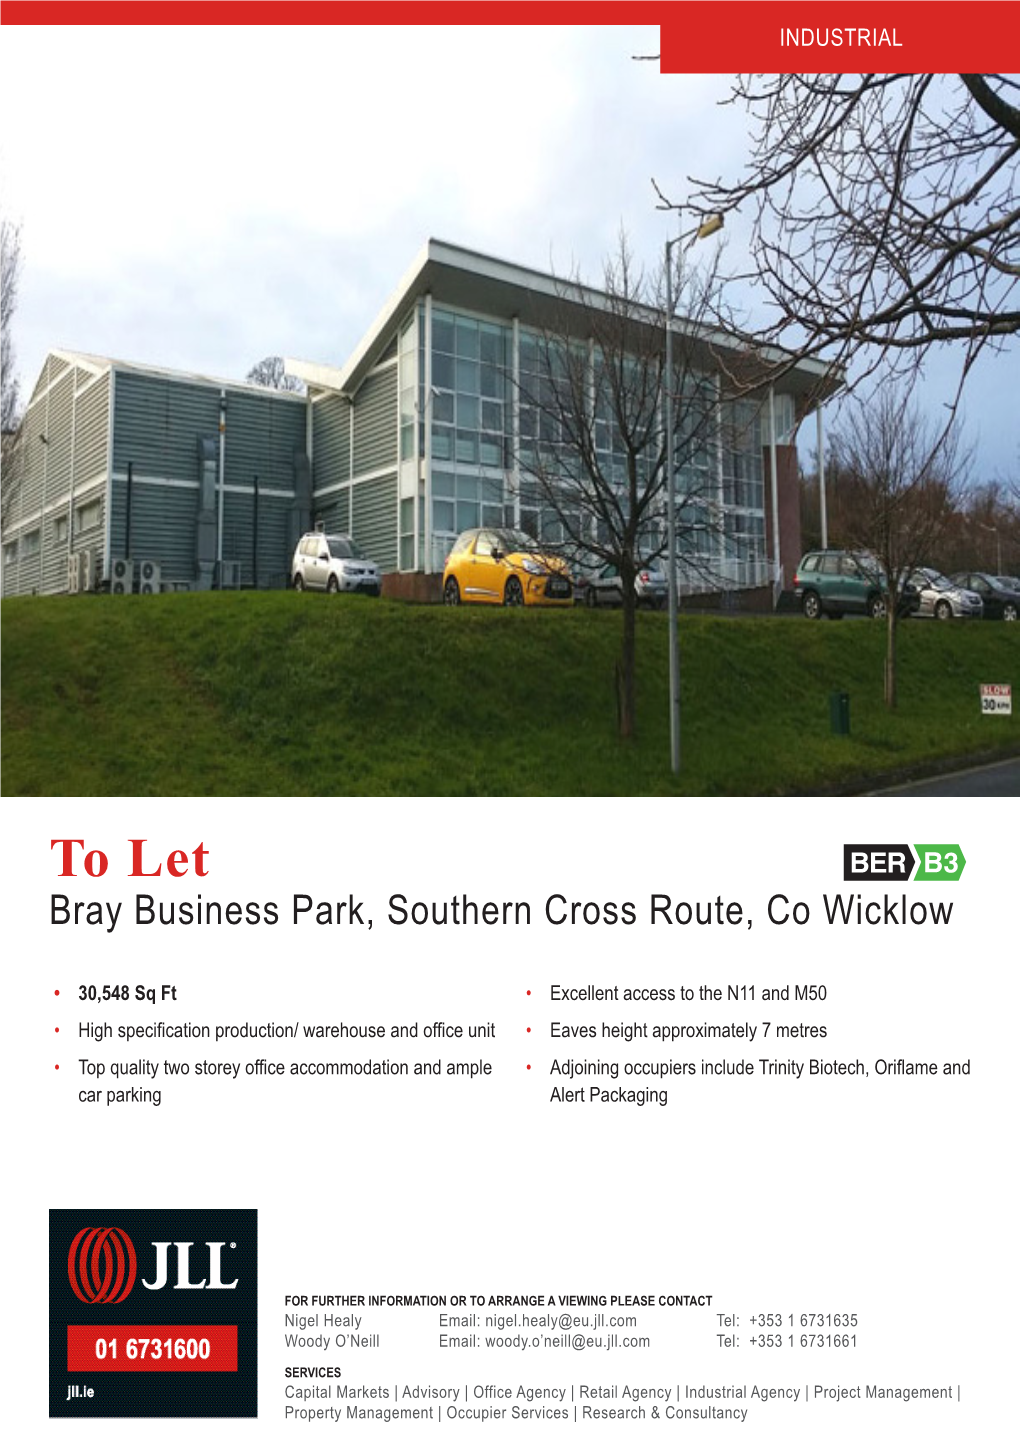 To Let Bray Business Park, Southern Cross Route, Co Wicklow